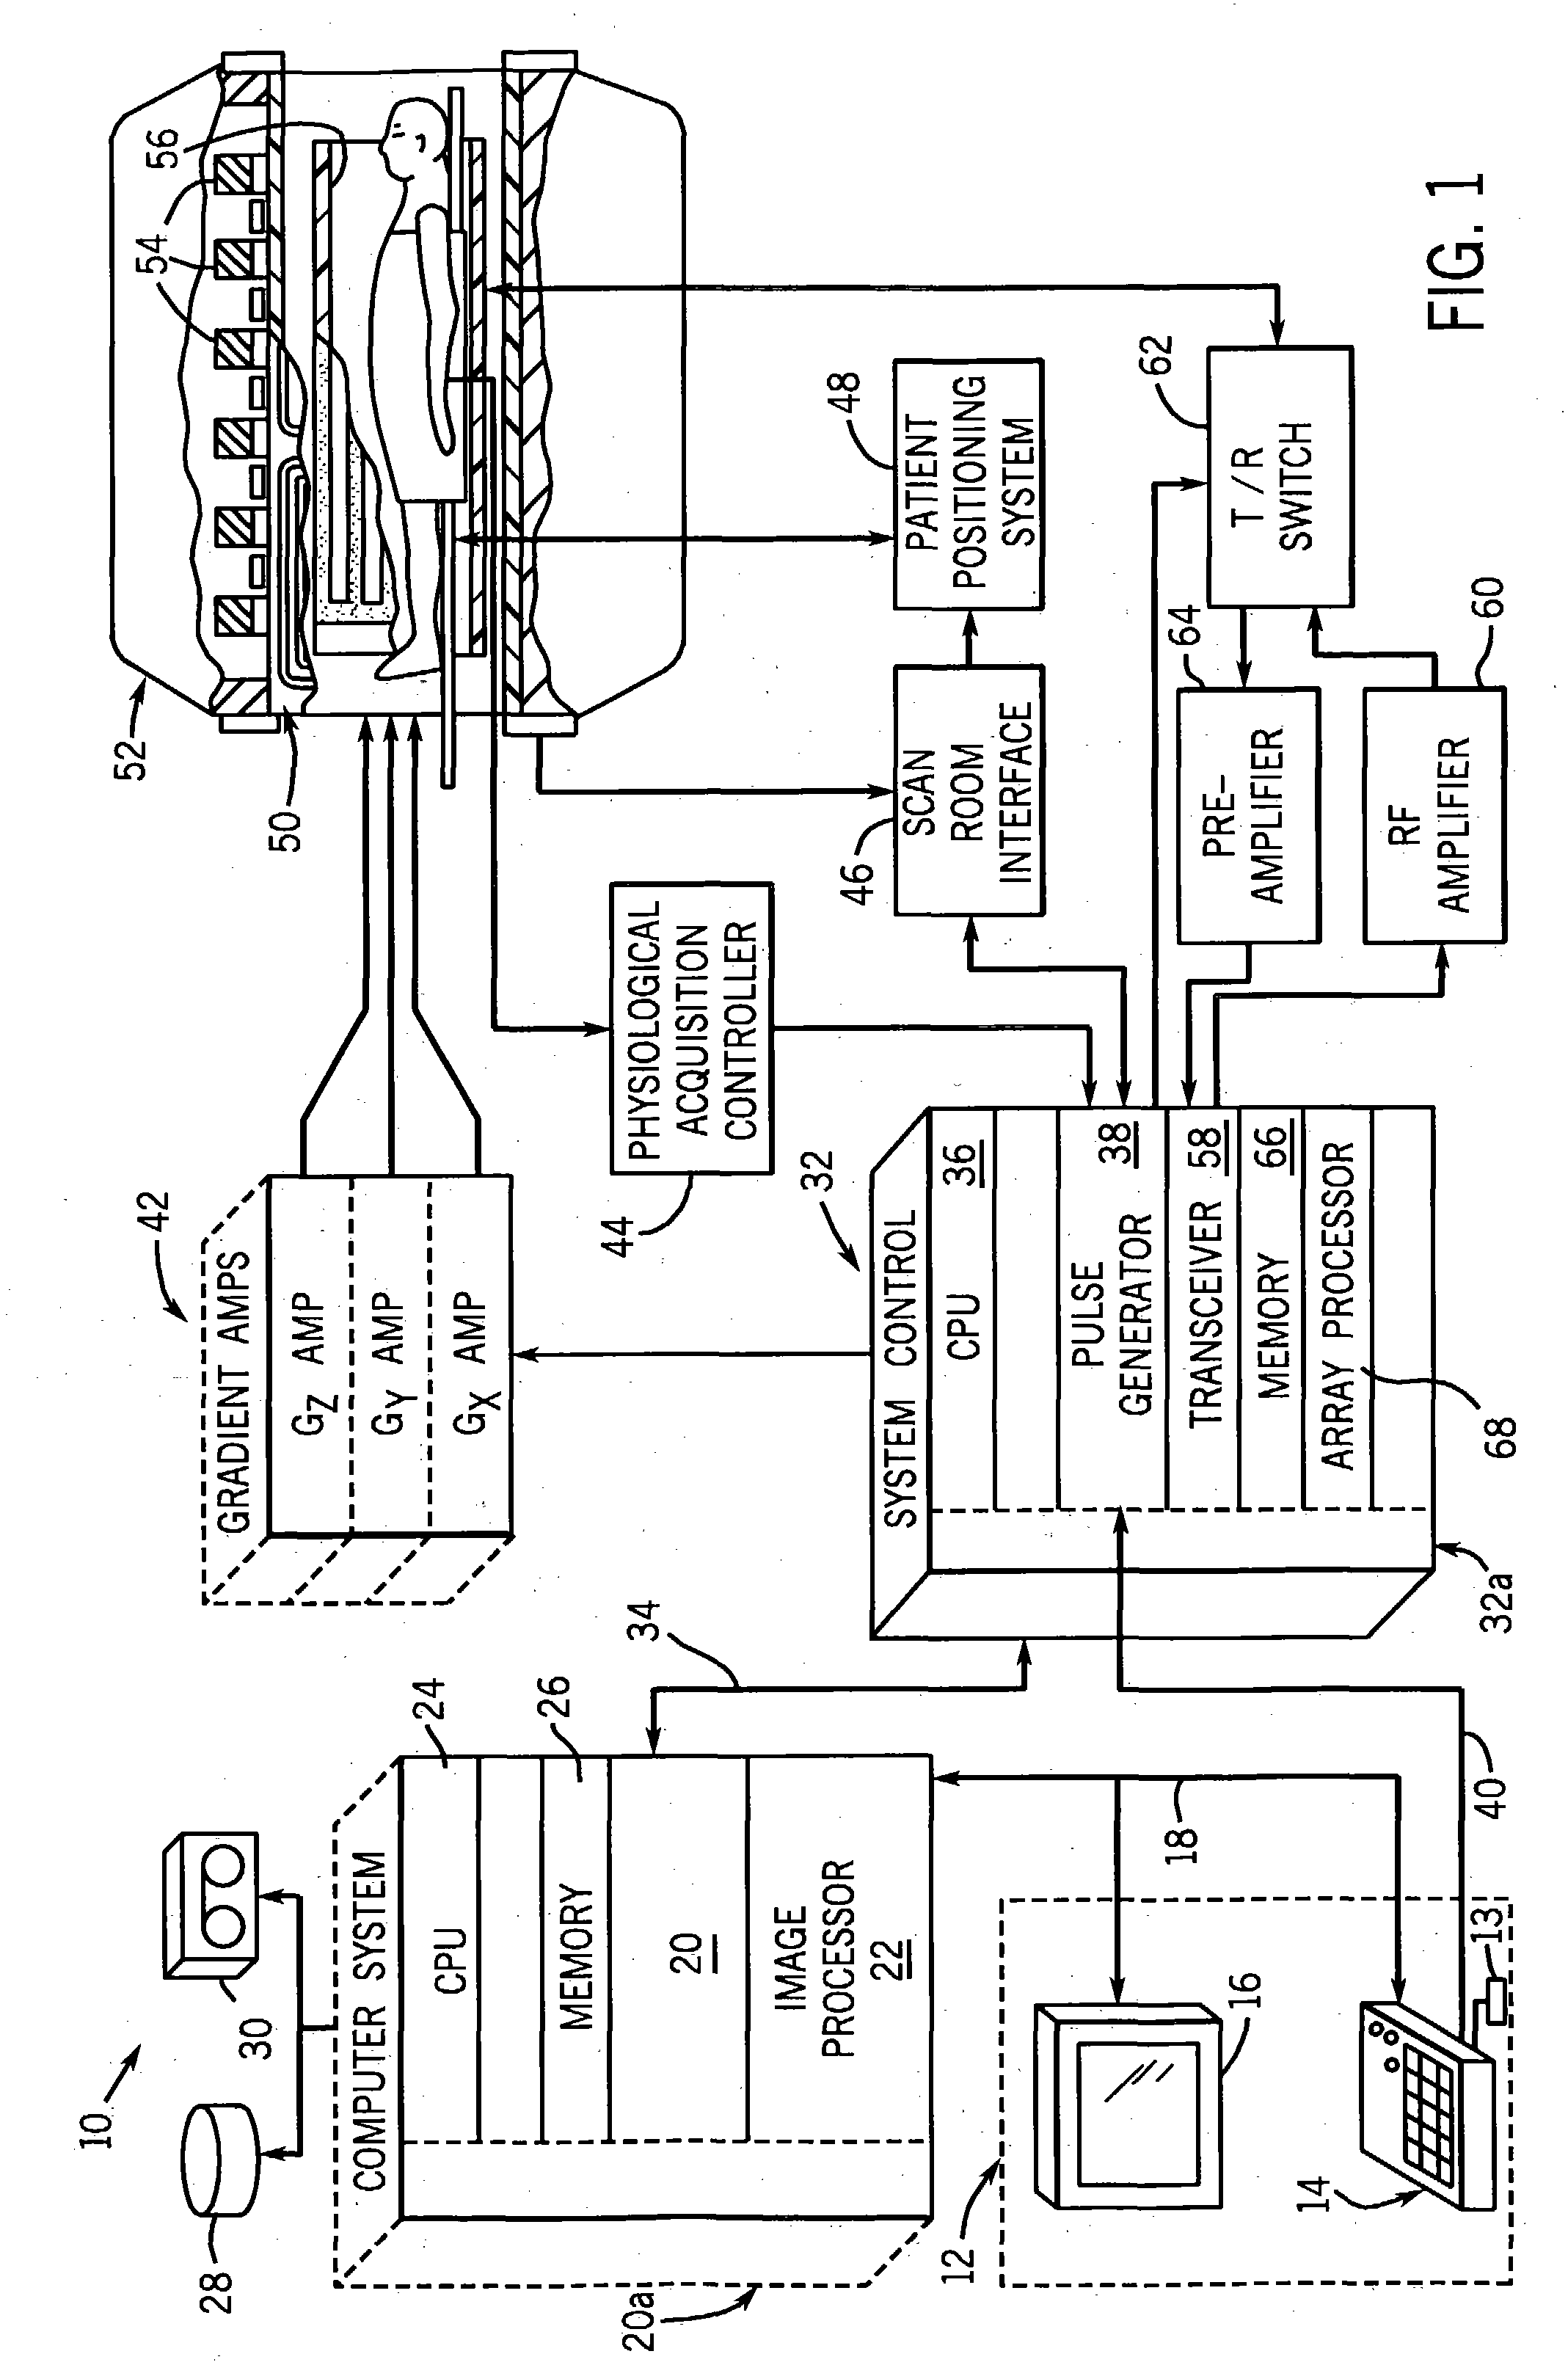 Method and apparatus to reduce RF power in high field MR imaging incorporating multi-phase RF pulse flip angles